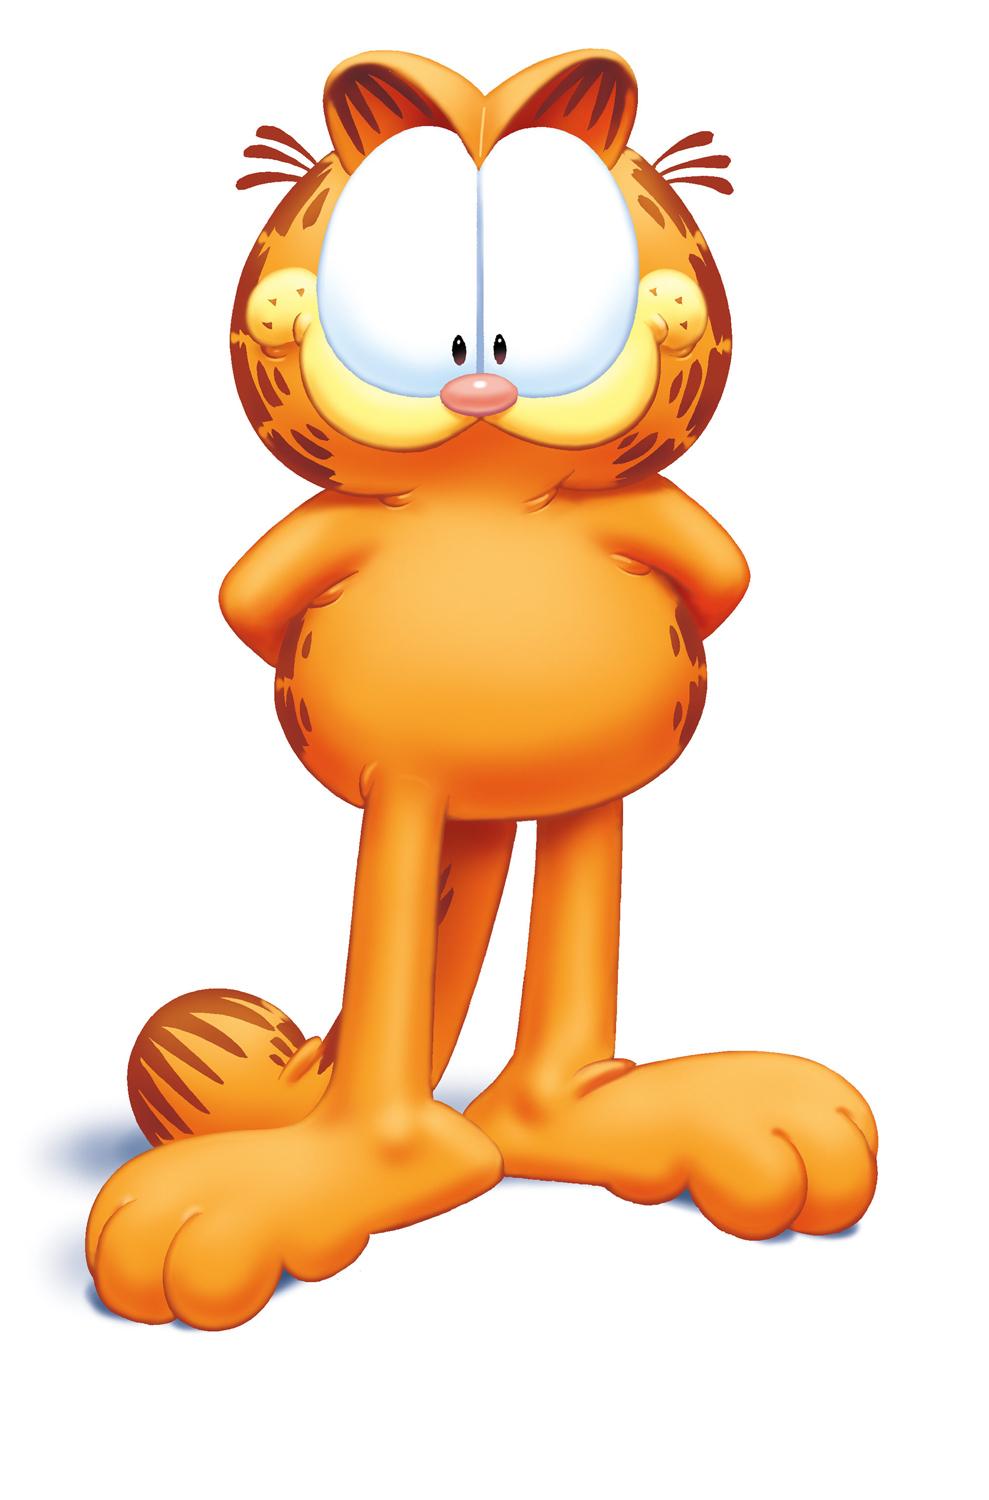 check out these garfield wallpapers i made : r/garfield